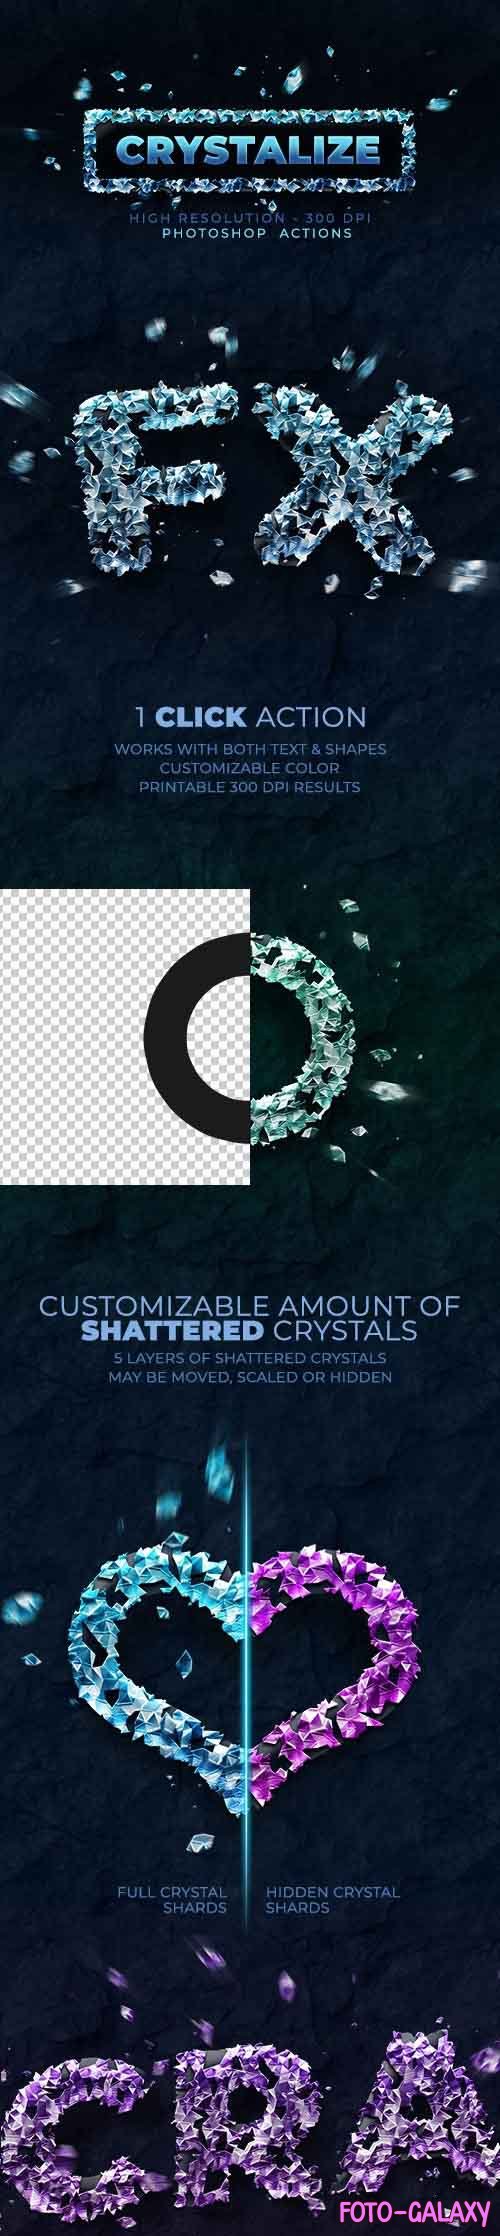 GraphicRiver - Crystalize - Photoshop Action - 300 DPI 28507917